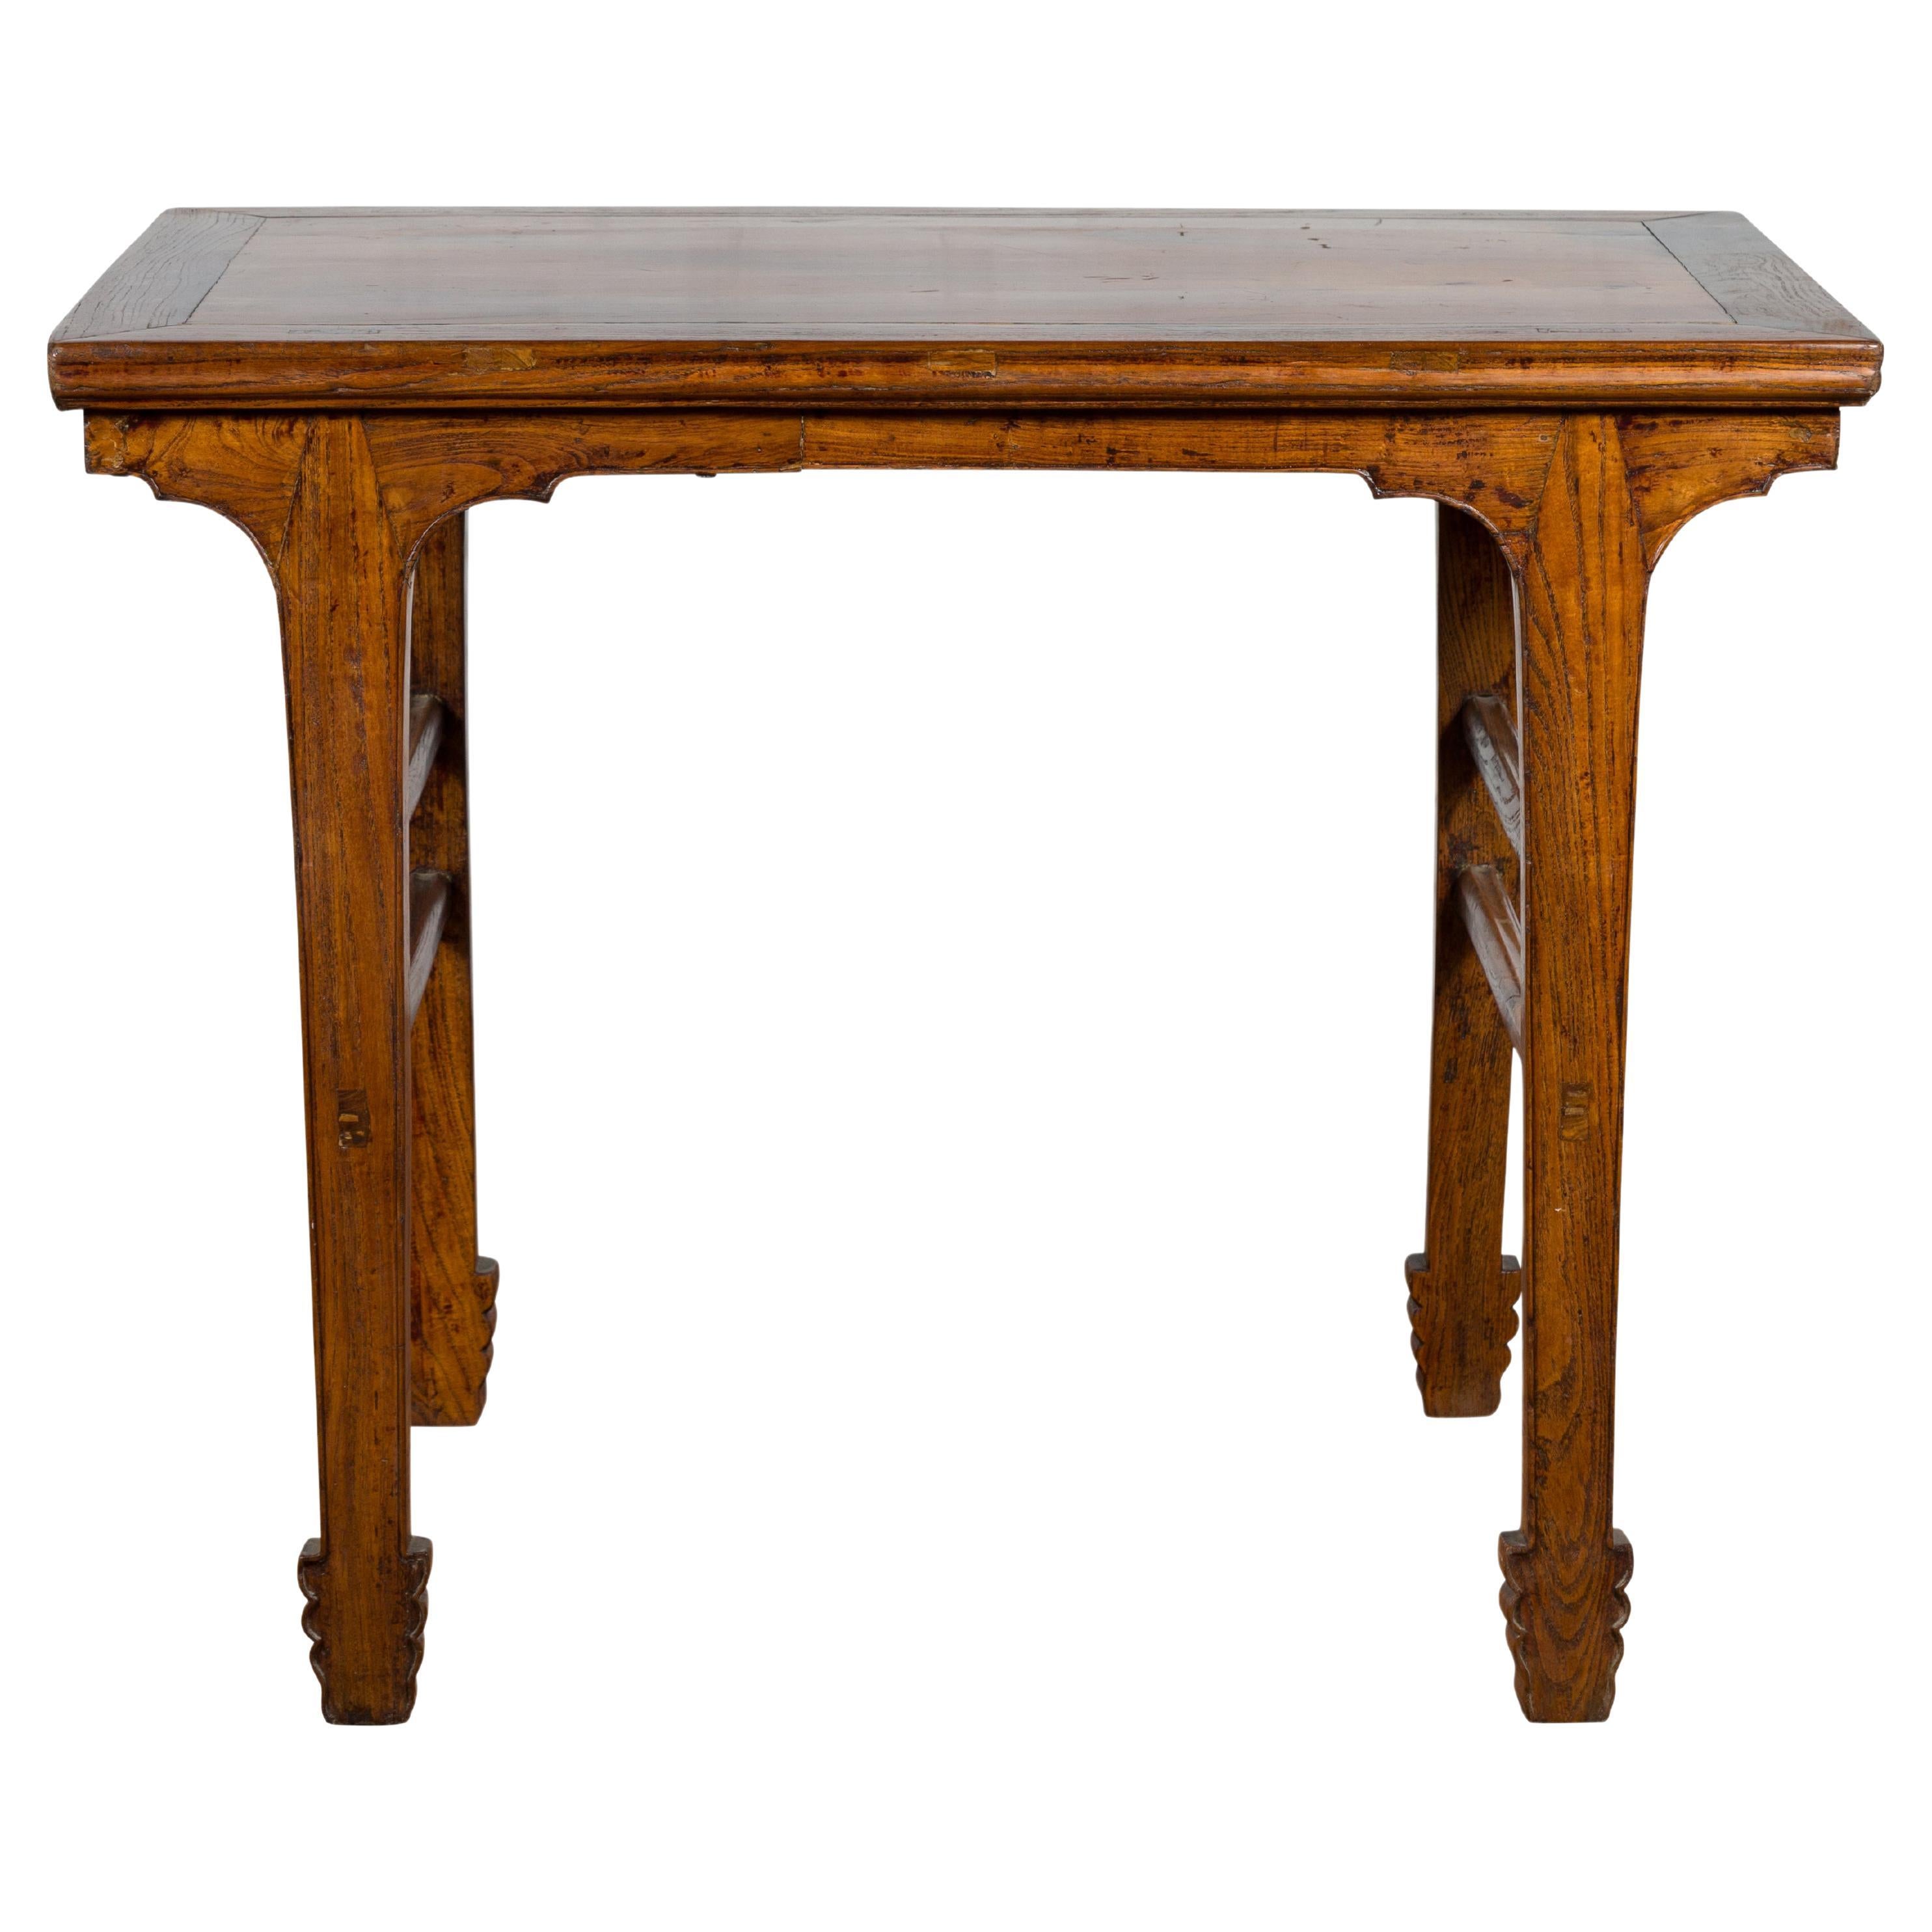 Late Qing Dynasty Chinese Elm Wine Table with Carved Legs and Side Stretchers